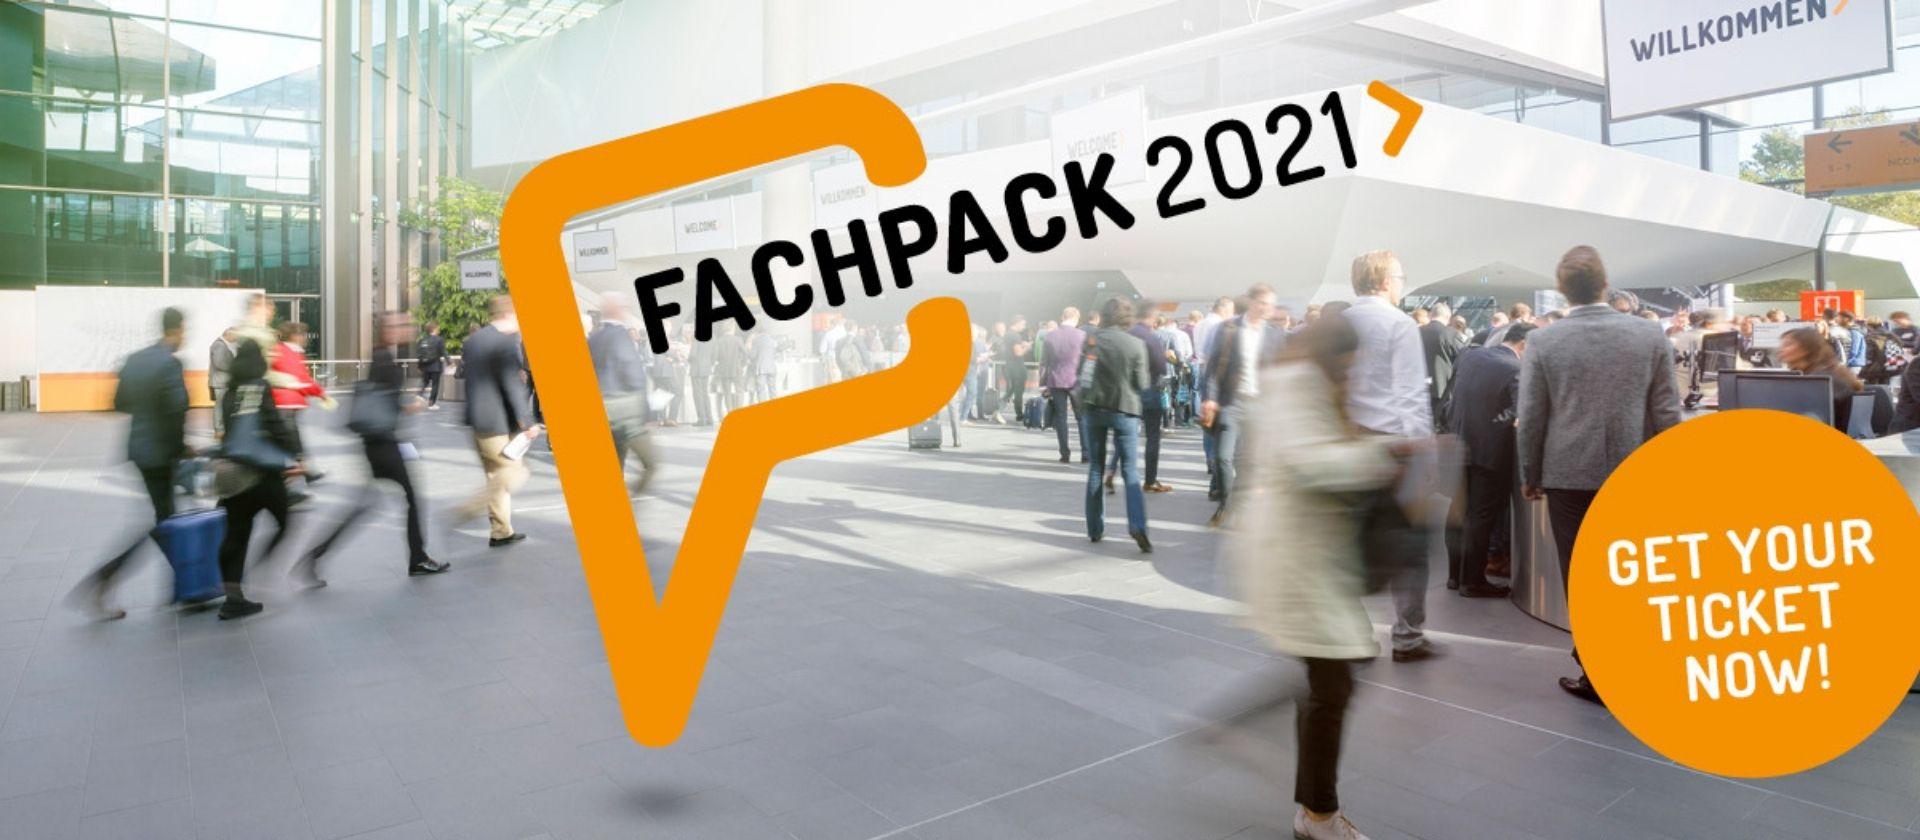 Volpak, together with its agent Agrama, will be exhibiting at the Fachpack 2021 in Nuremberg.  This year the trade show will be focusing on sustainability, circular economy, and environmentally friendly packaging solutions.  Visit us in hall 3C, stand 347 and ask about the sustainable solutions we can provide you.